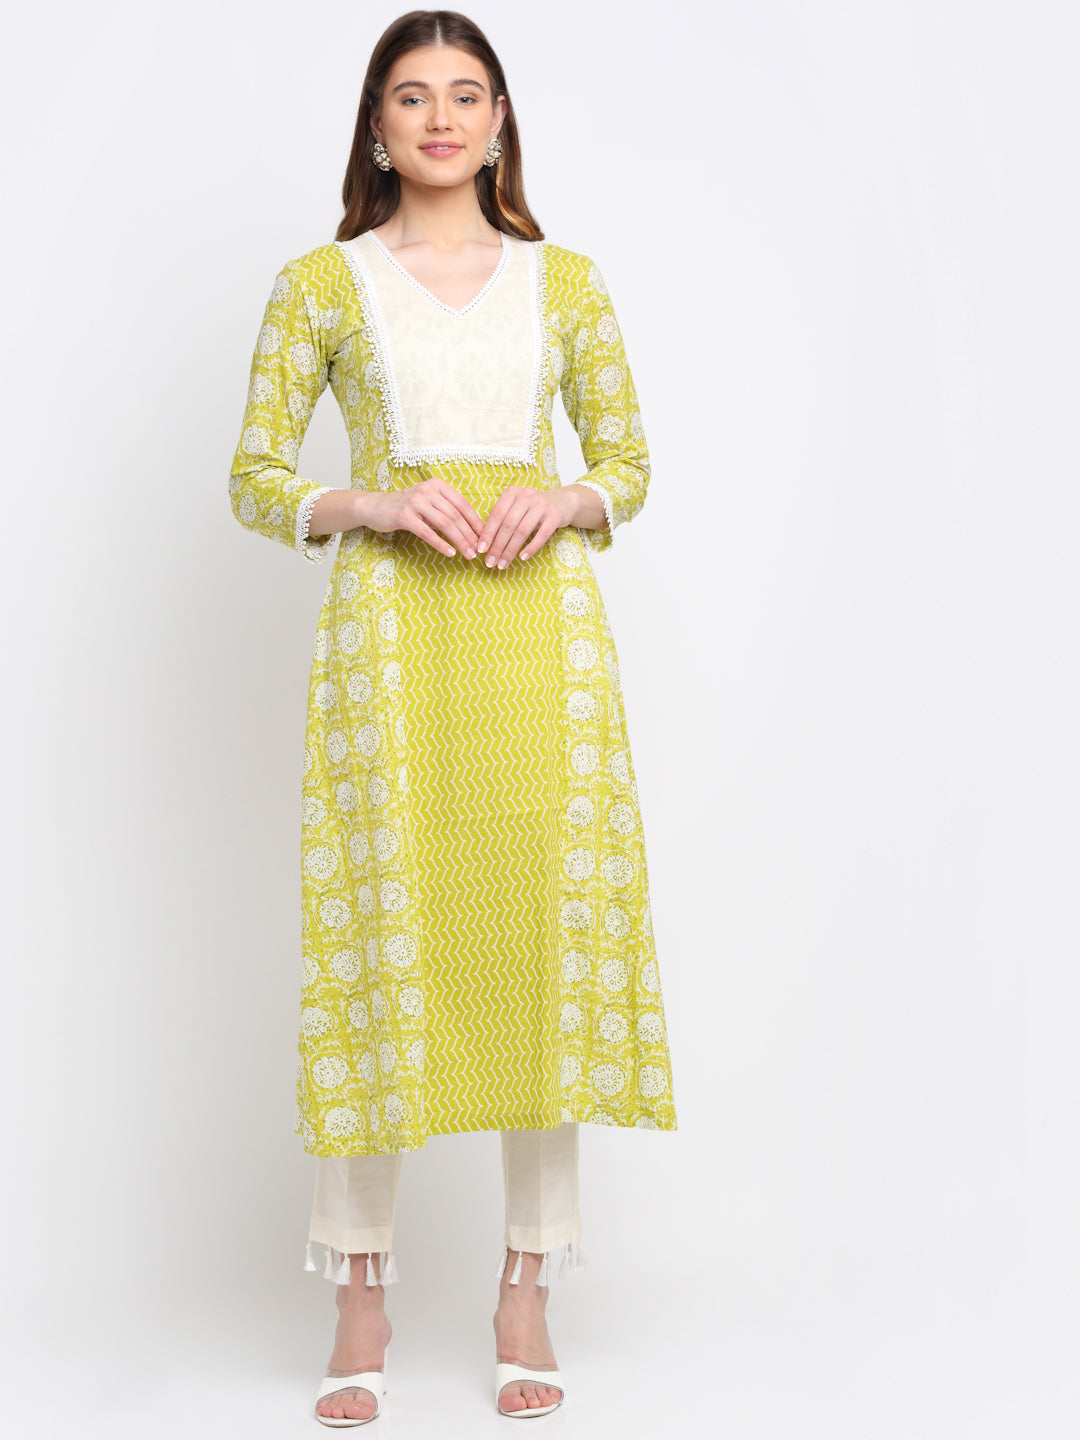 Trendy Colorful Skirt With Embroidery Panel | Latest Kurti Designs